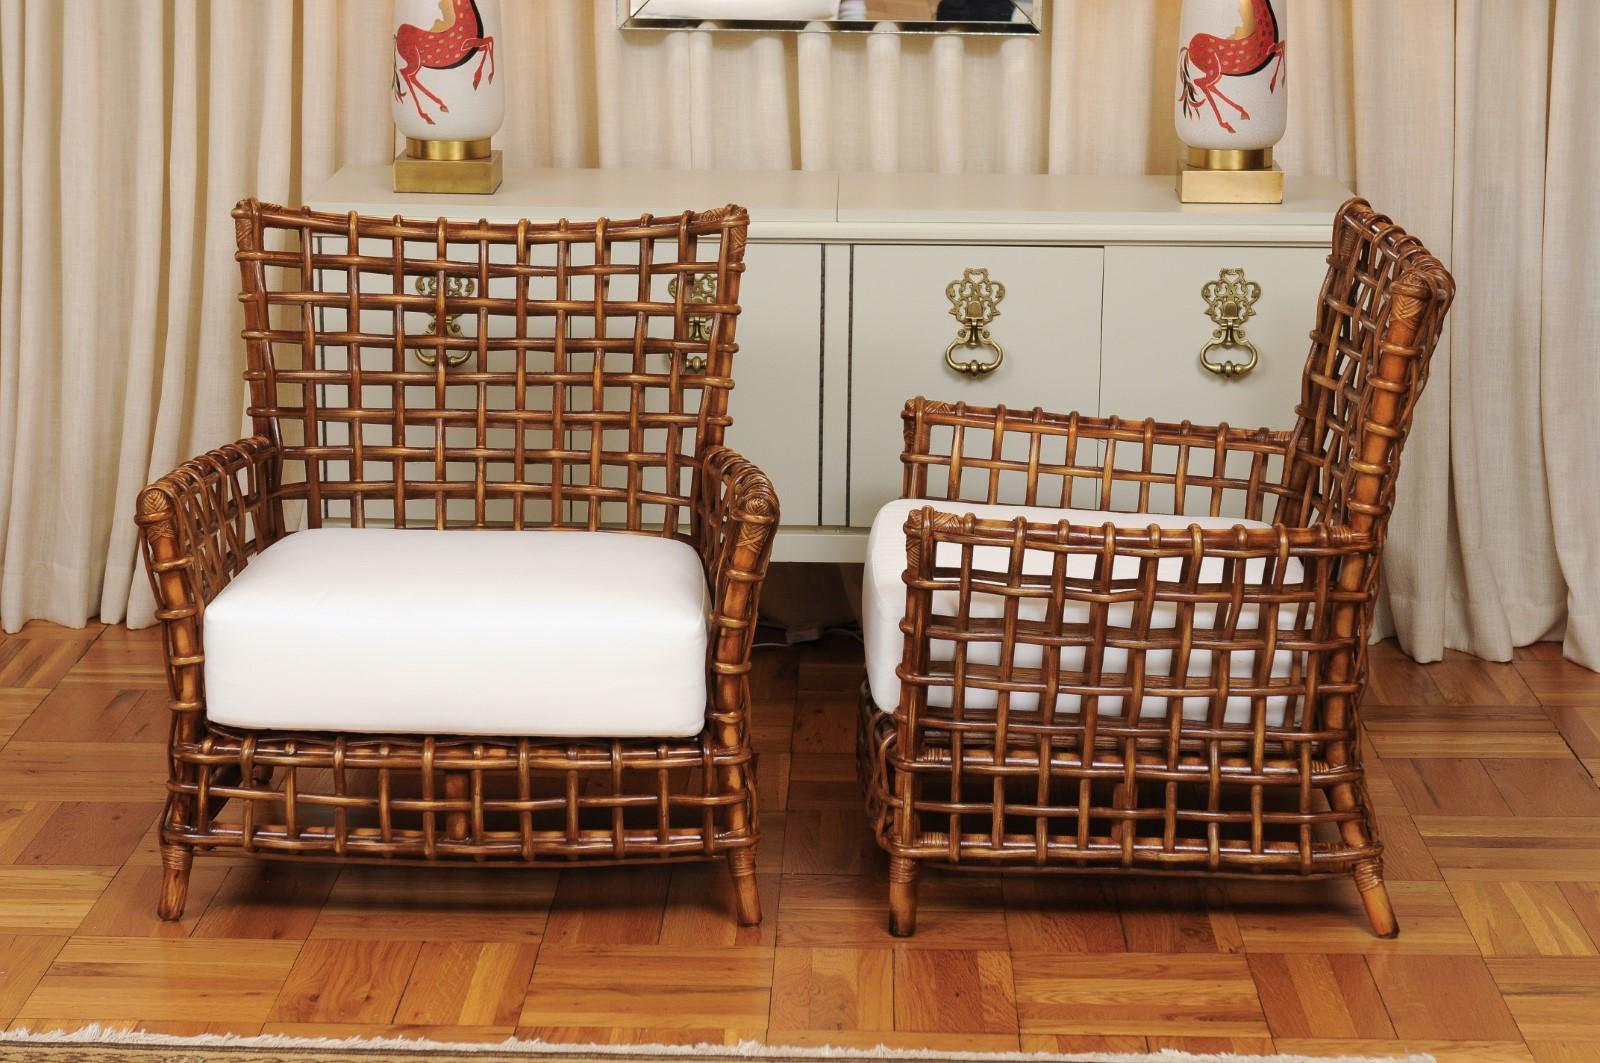 Fabulous Pair of Caramel Rattan and Cane Club Chairs - 2 Pair Available For Sale 6